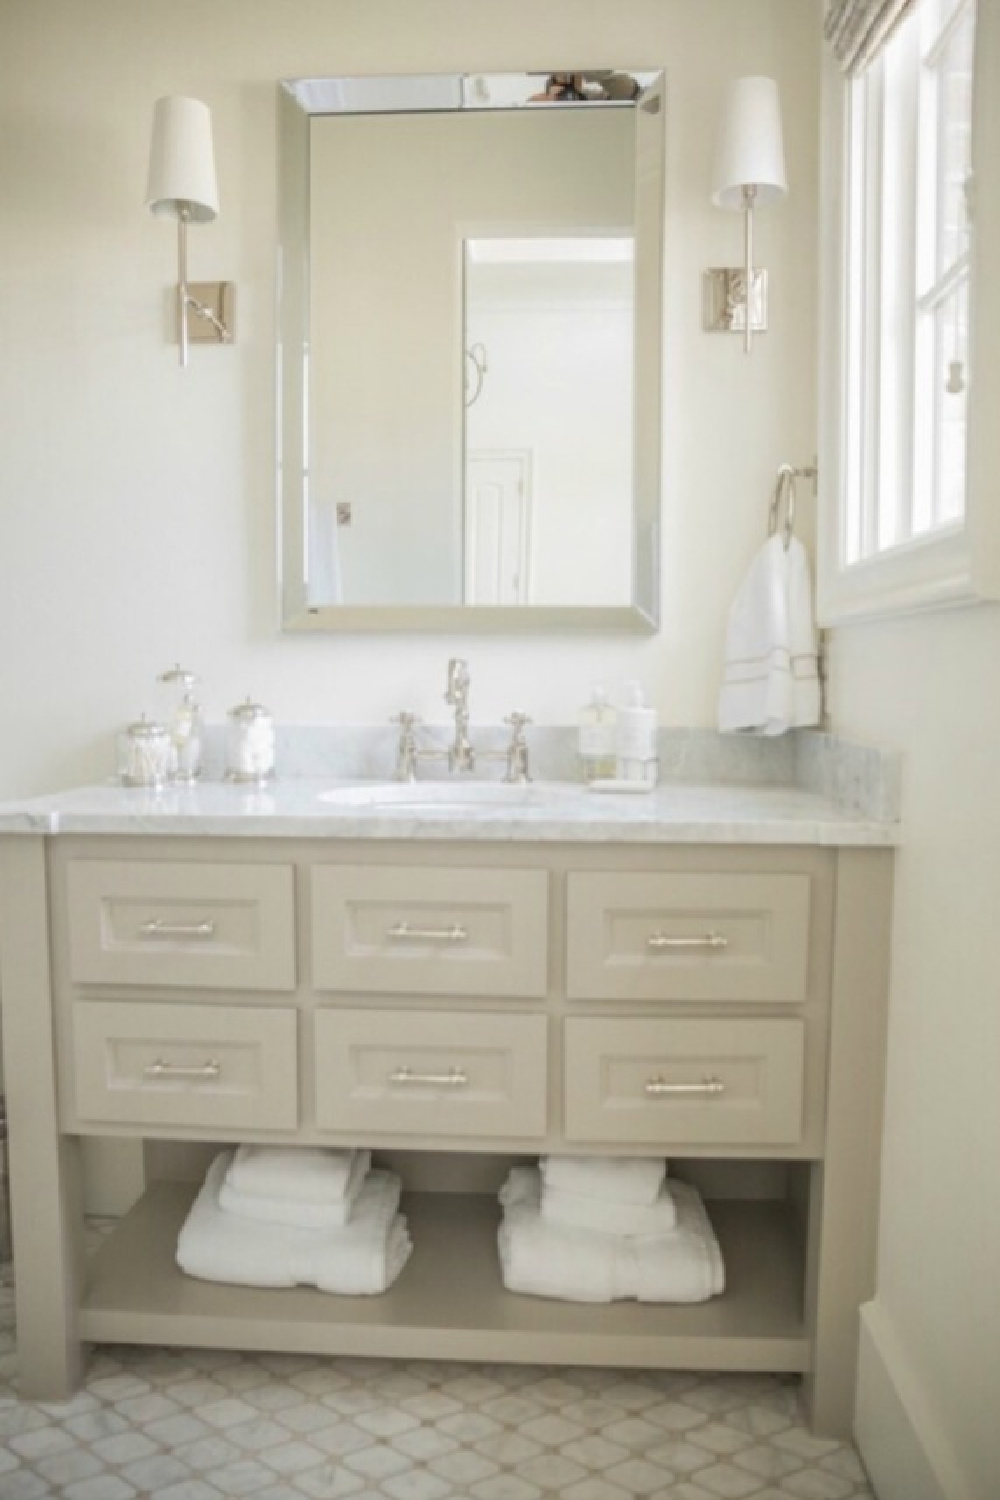 French country farmhouse bathroom with Sherwin Williams Alabaster paint color on walls. Brit Jones Design.